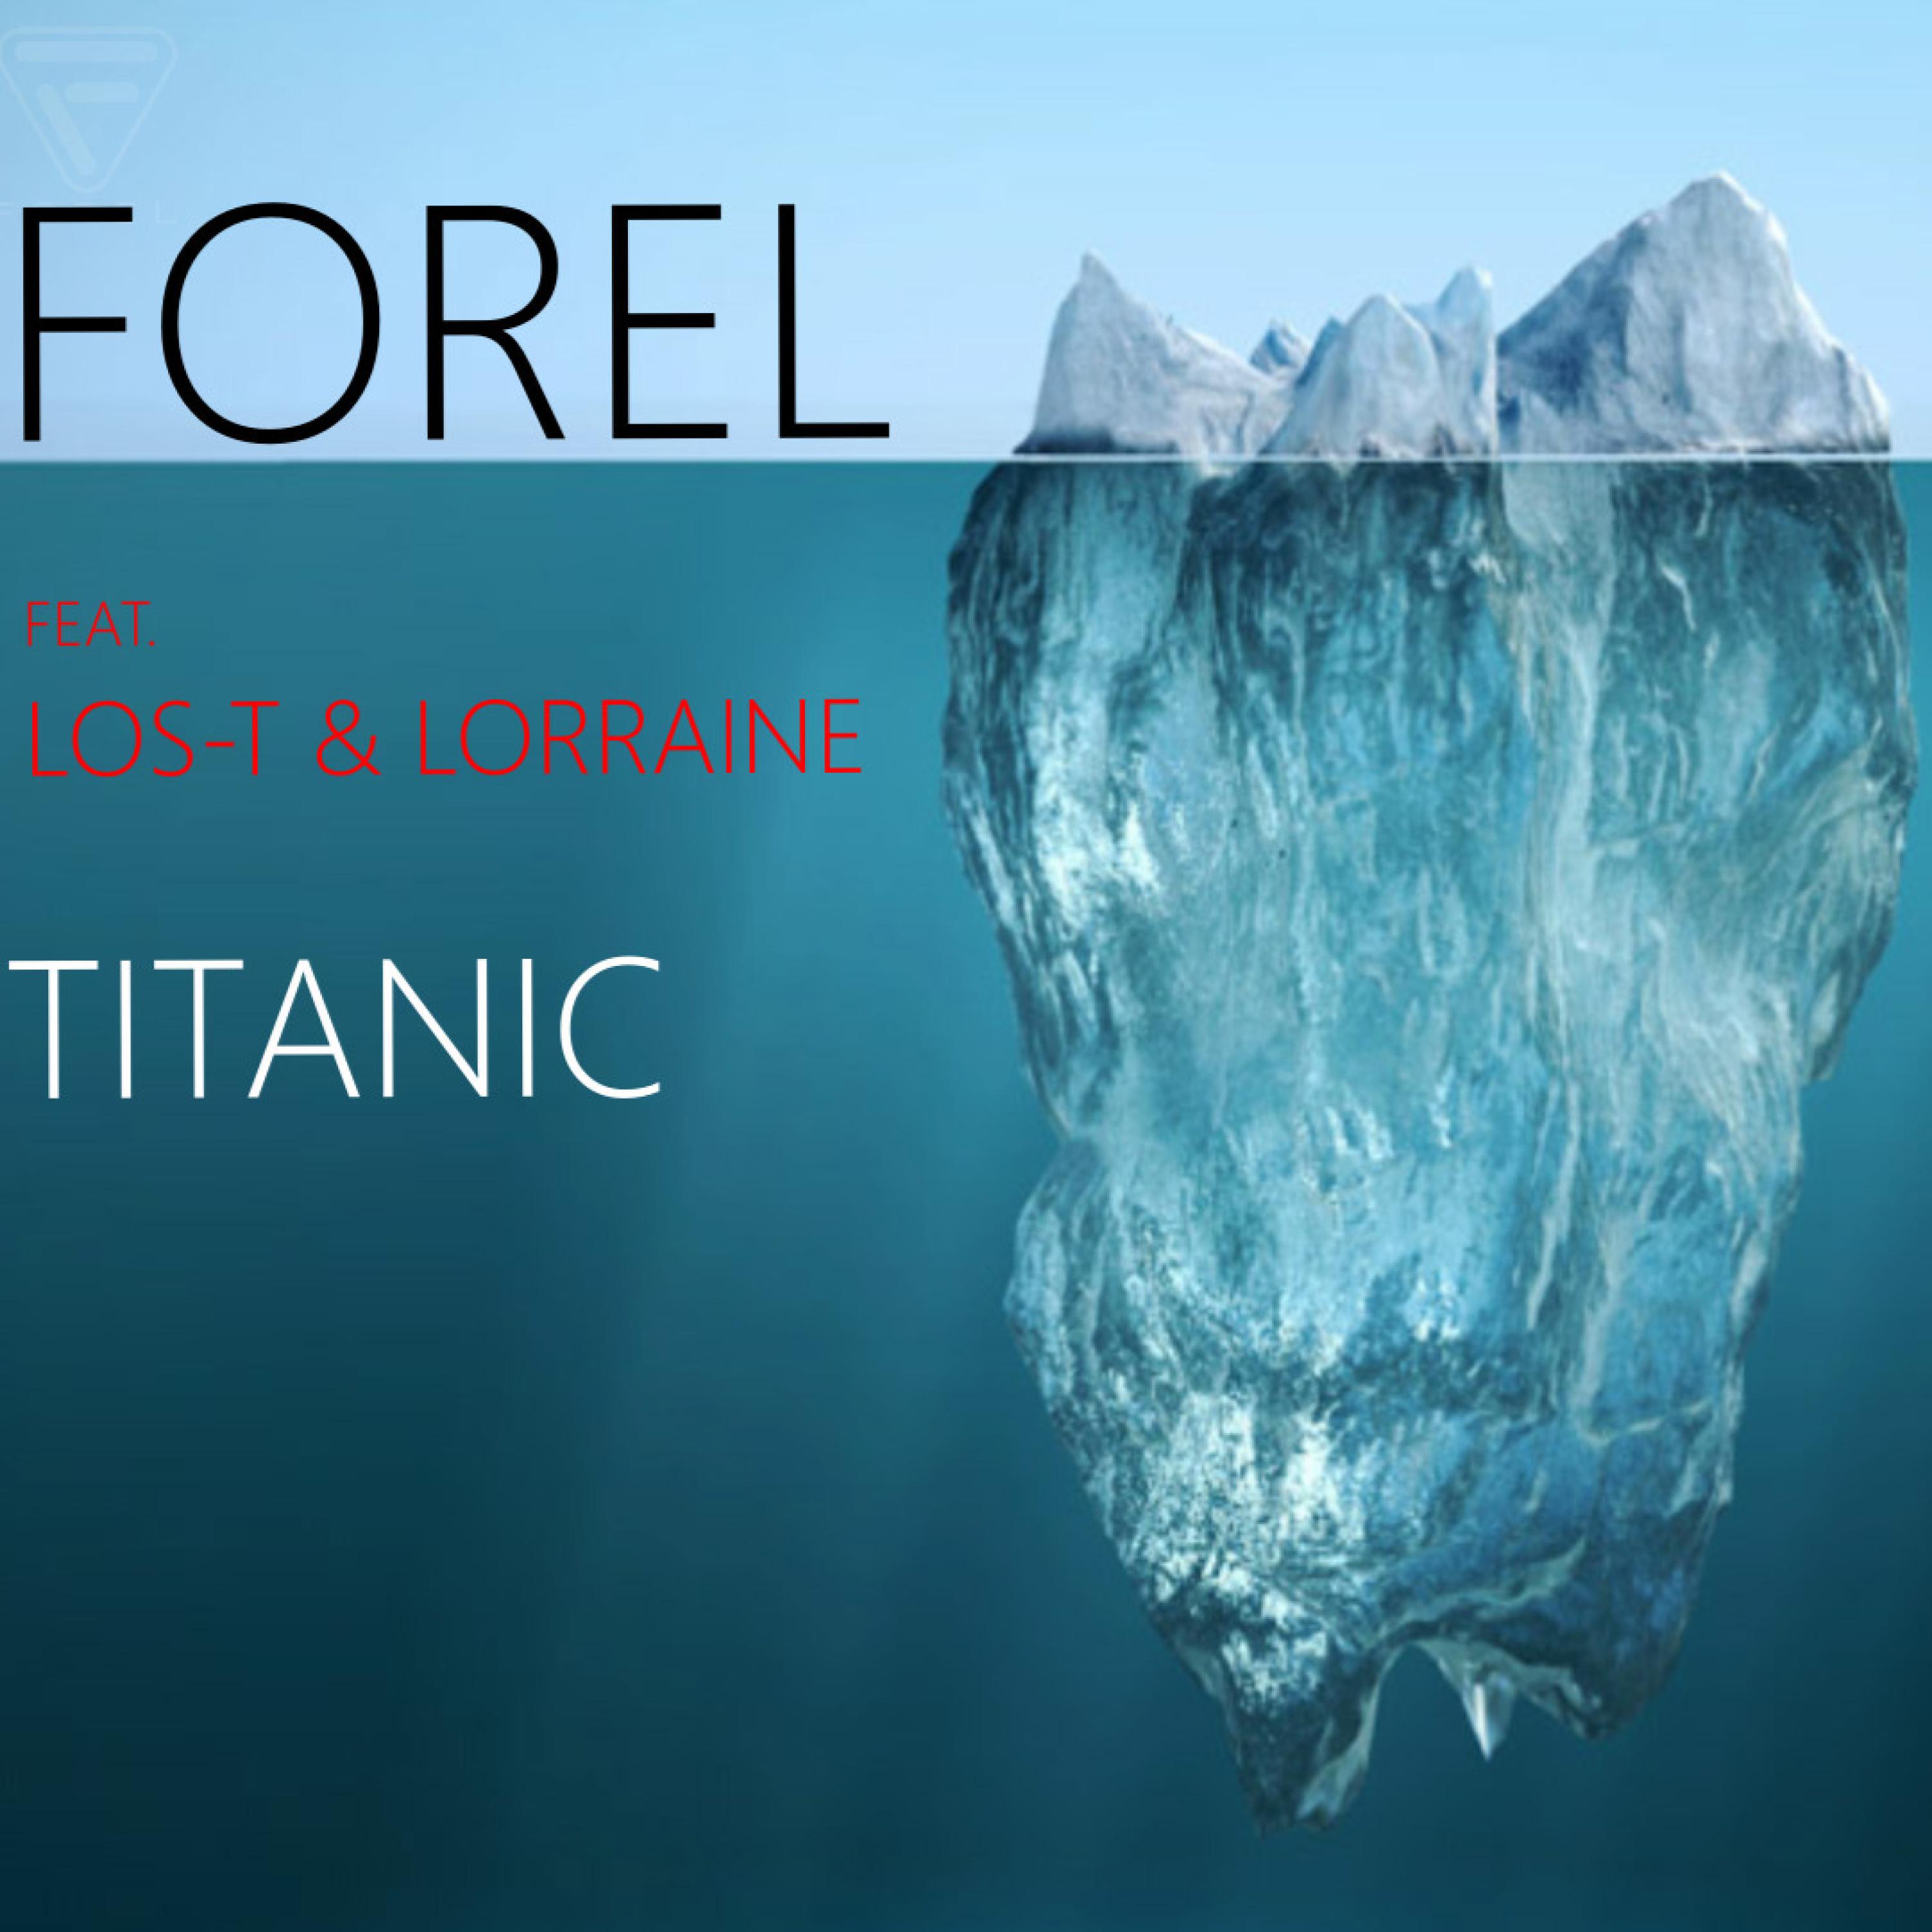 FOREL THE BAND - Titanic (feat. Los-T & Lorraine)